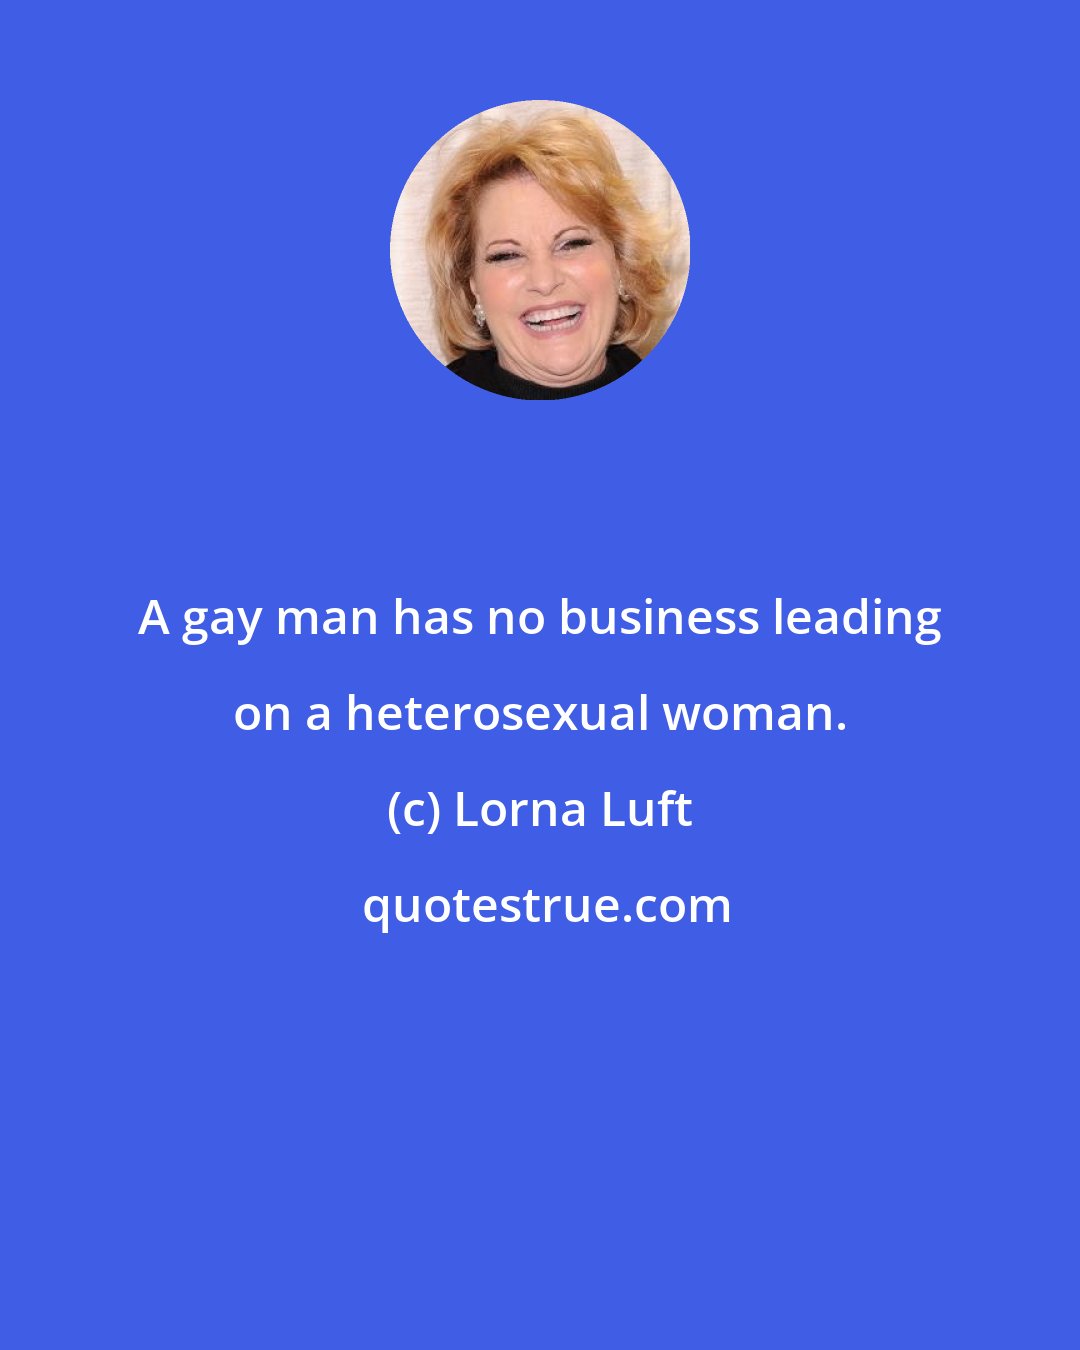 Lorna Luft: A gay man has no business leading on a heterosexual woman.